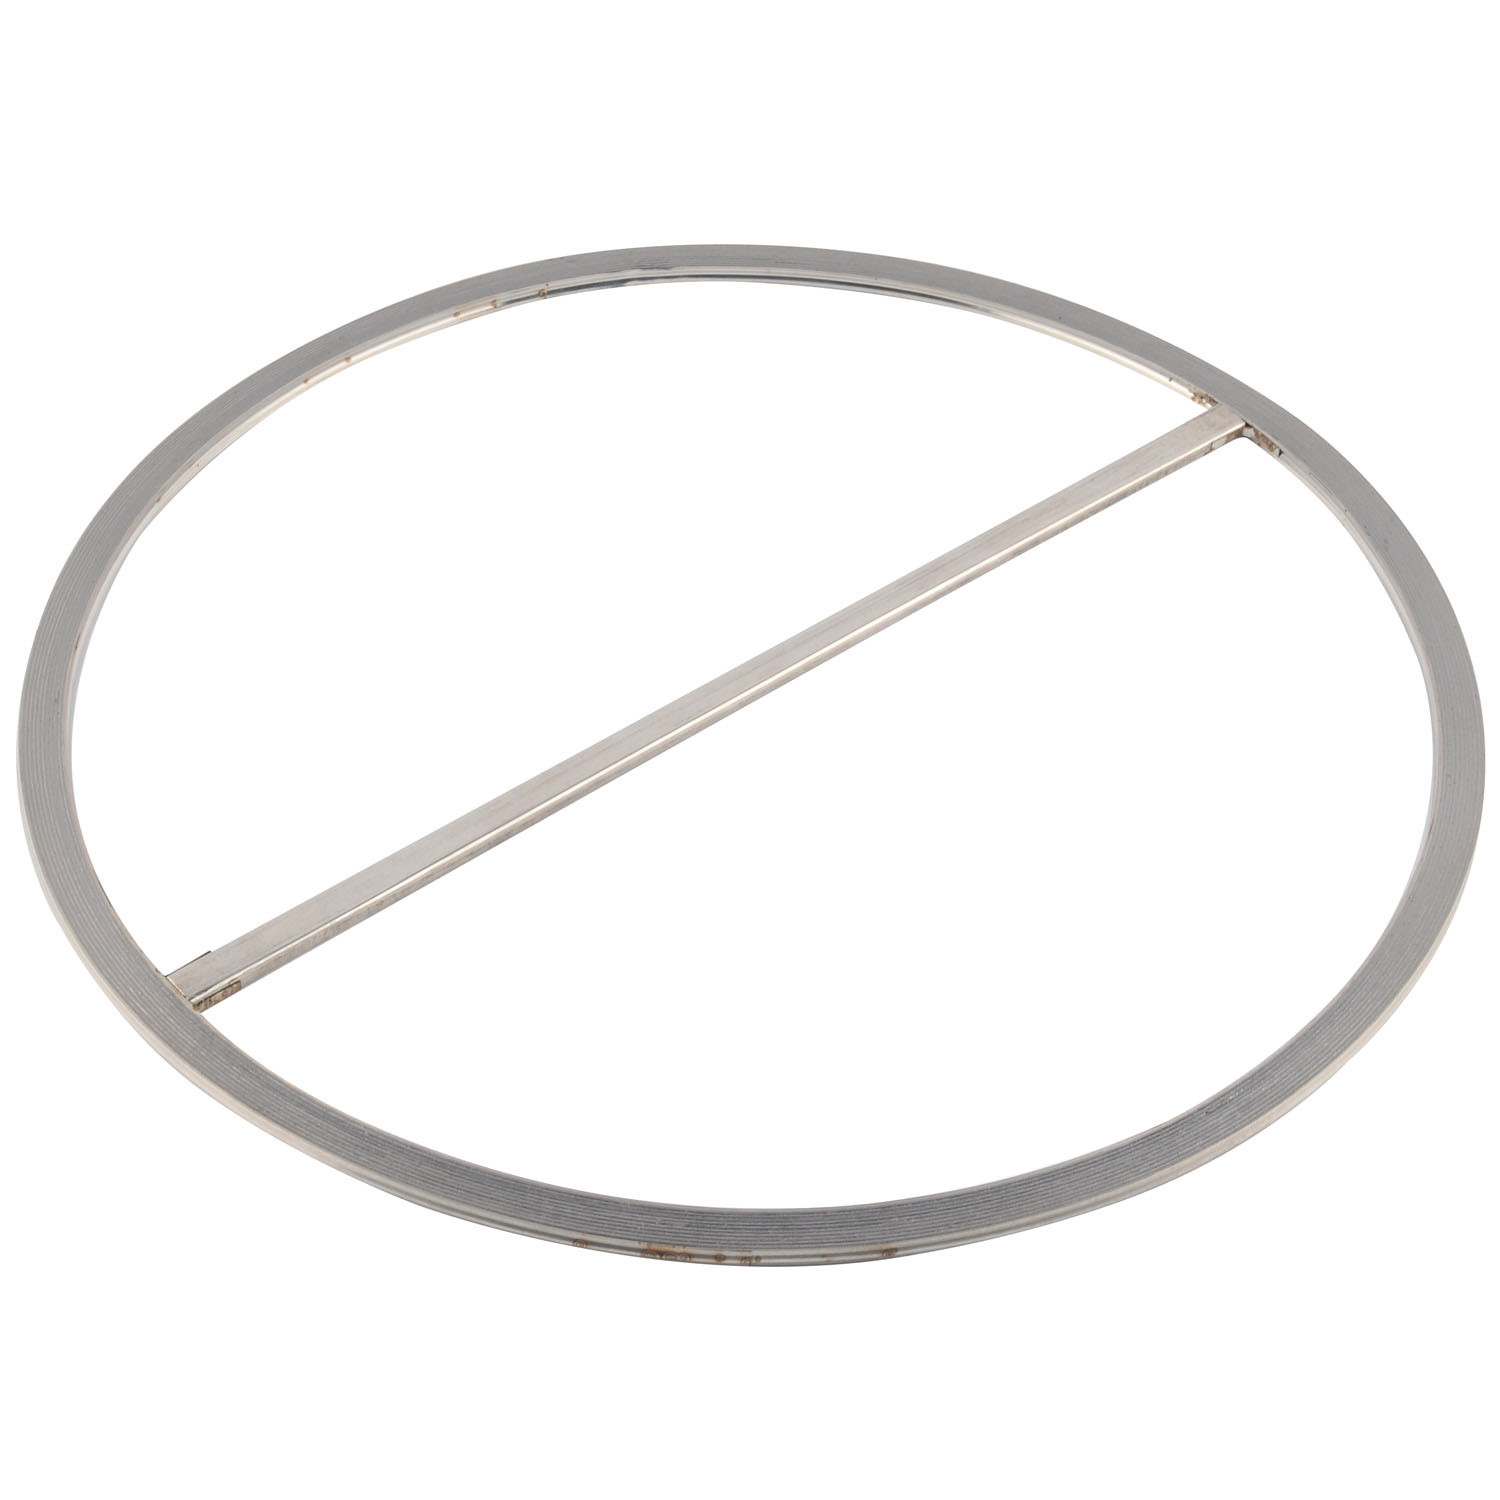 Spiral Wound Gasket with The Bar